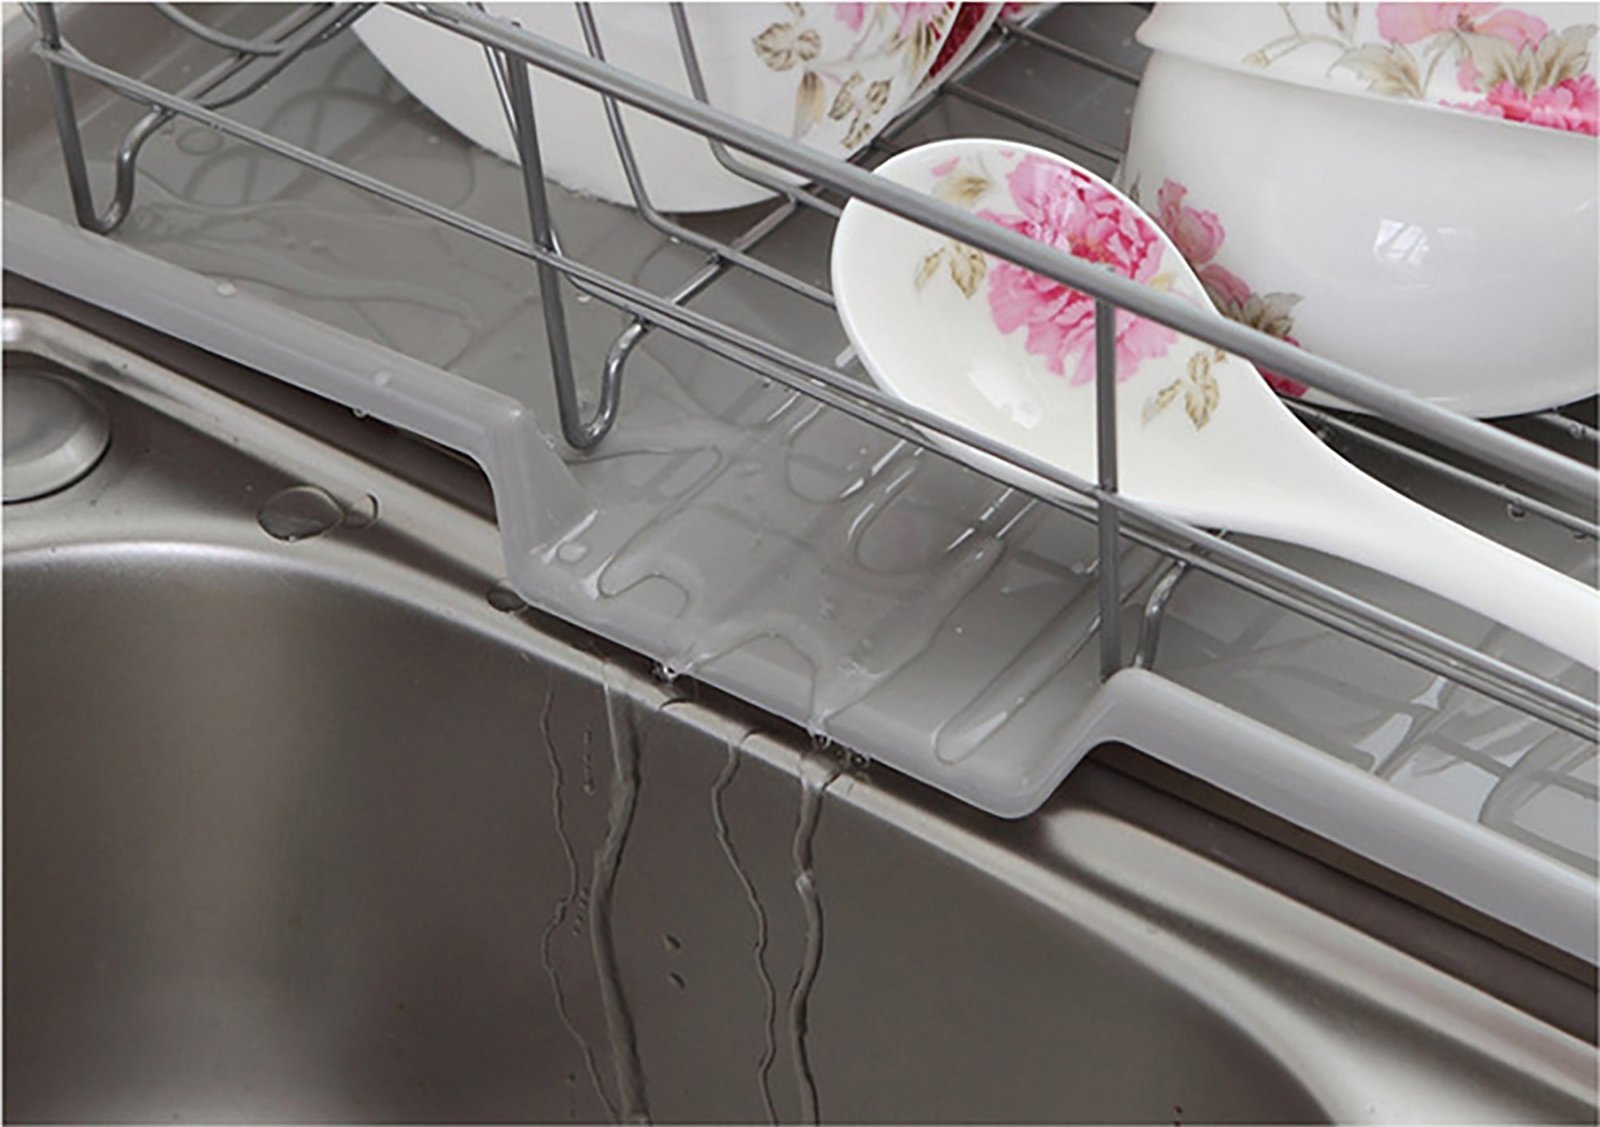 org stainless steel dish rack with drain board